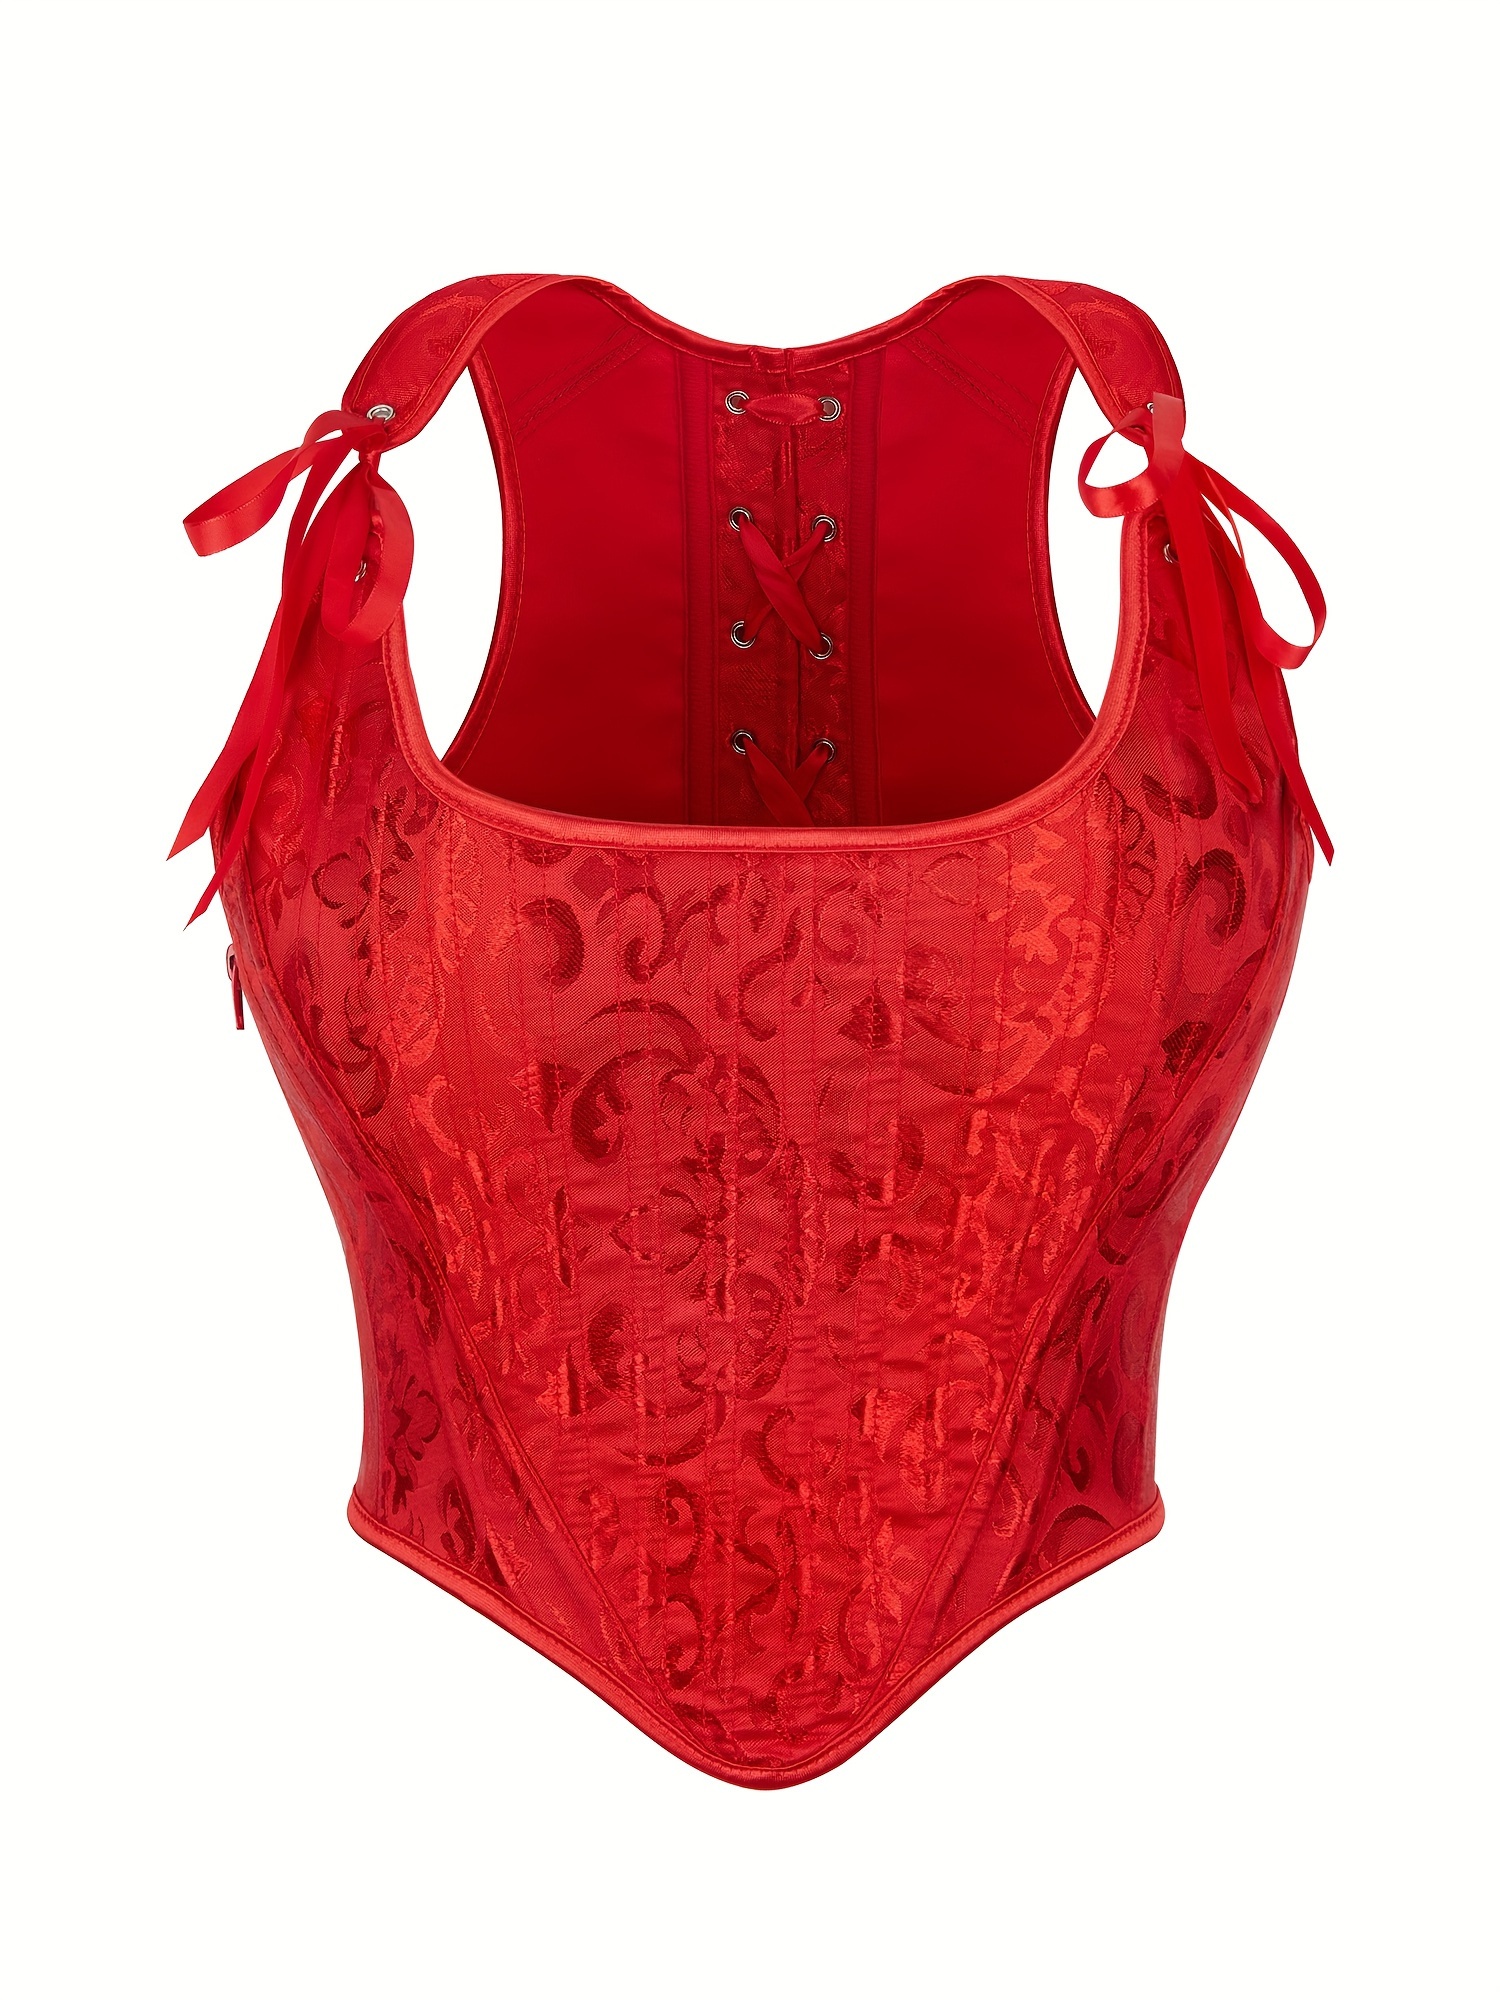 Red Mesh Lace Up Body Shaper Slimming Shapewear Underweary Lingerie Tank Top  Halter